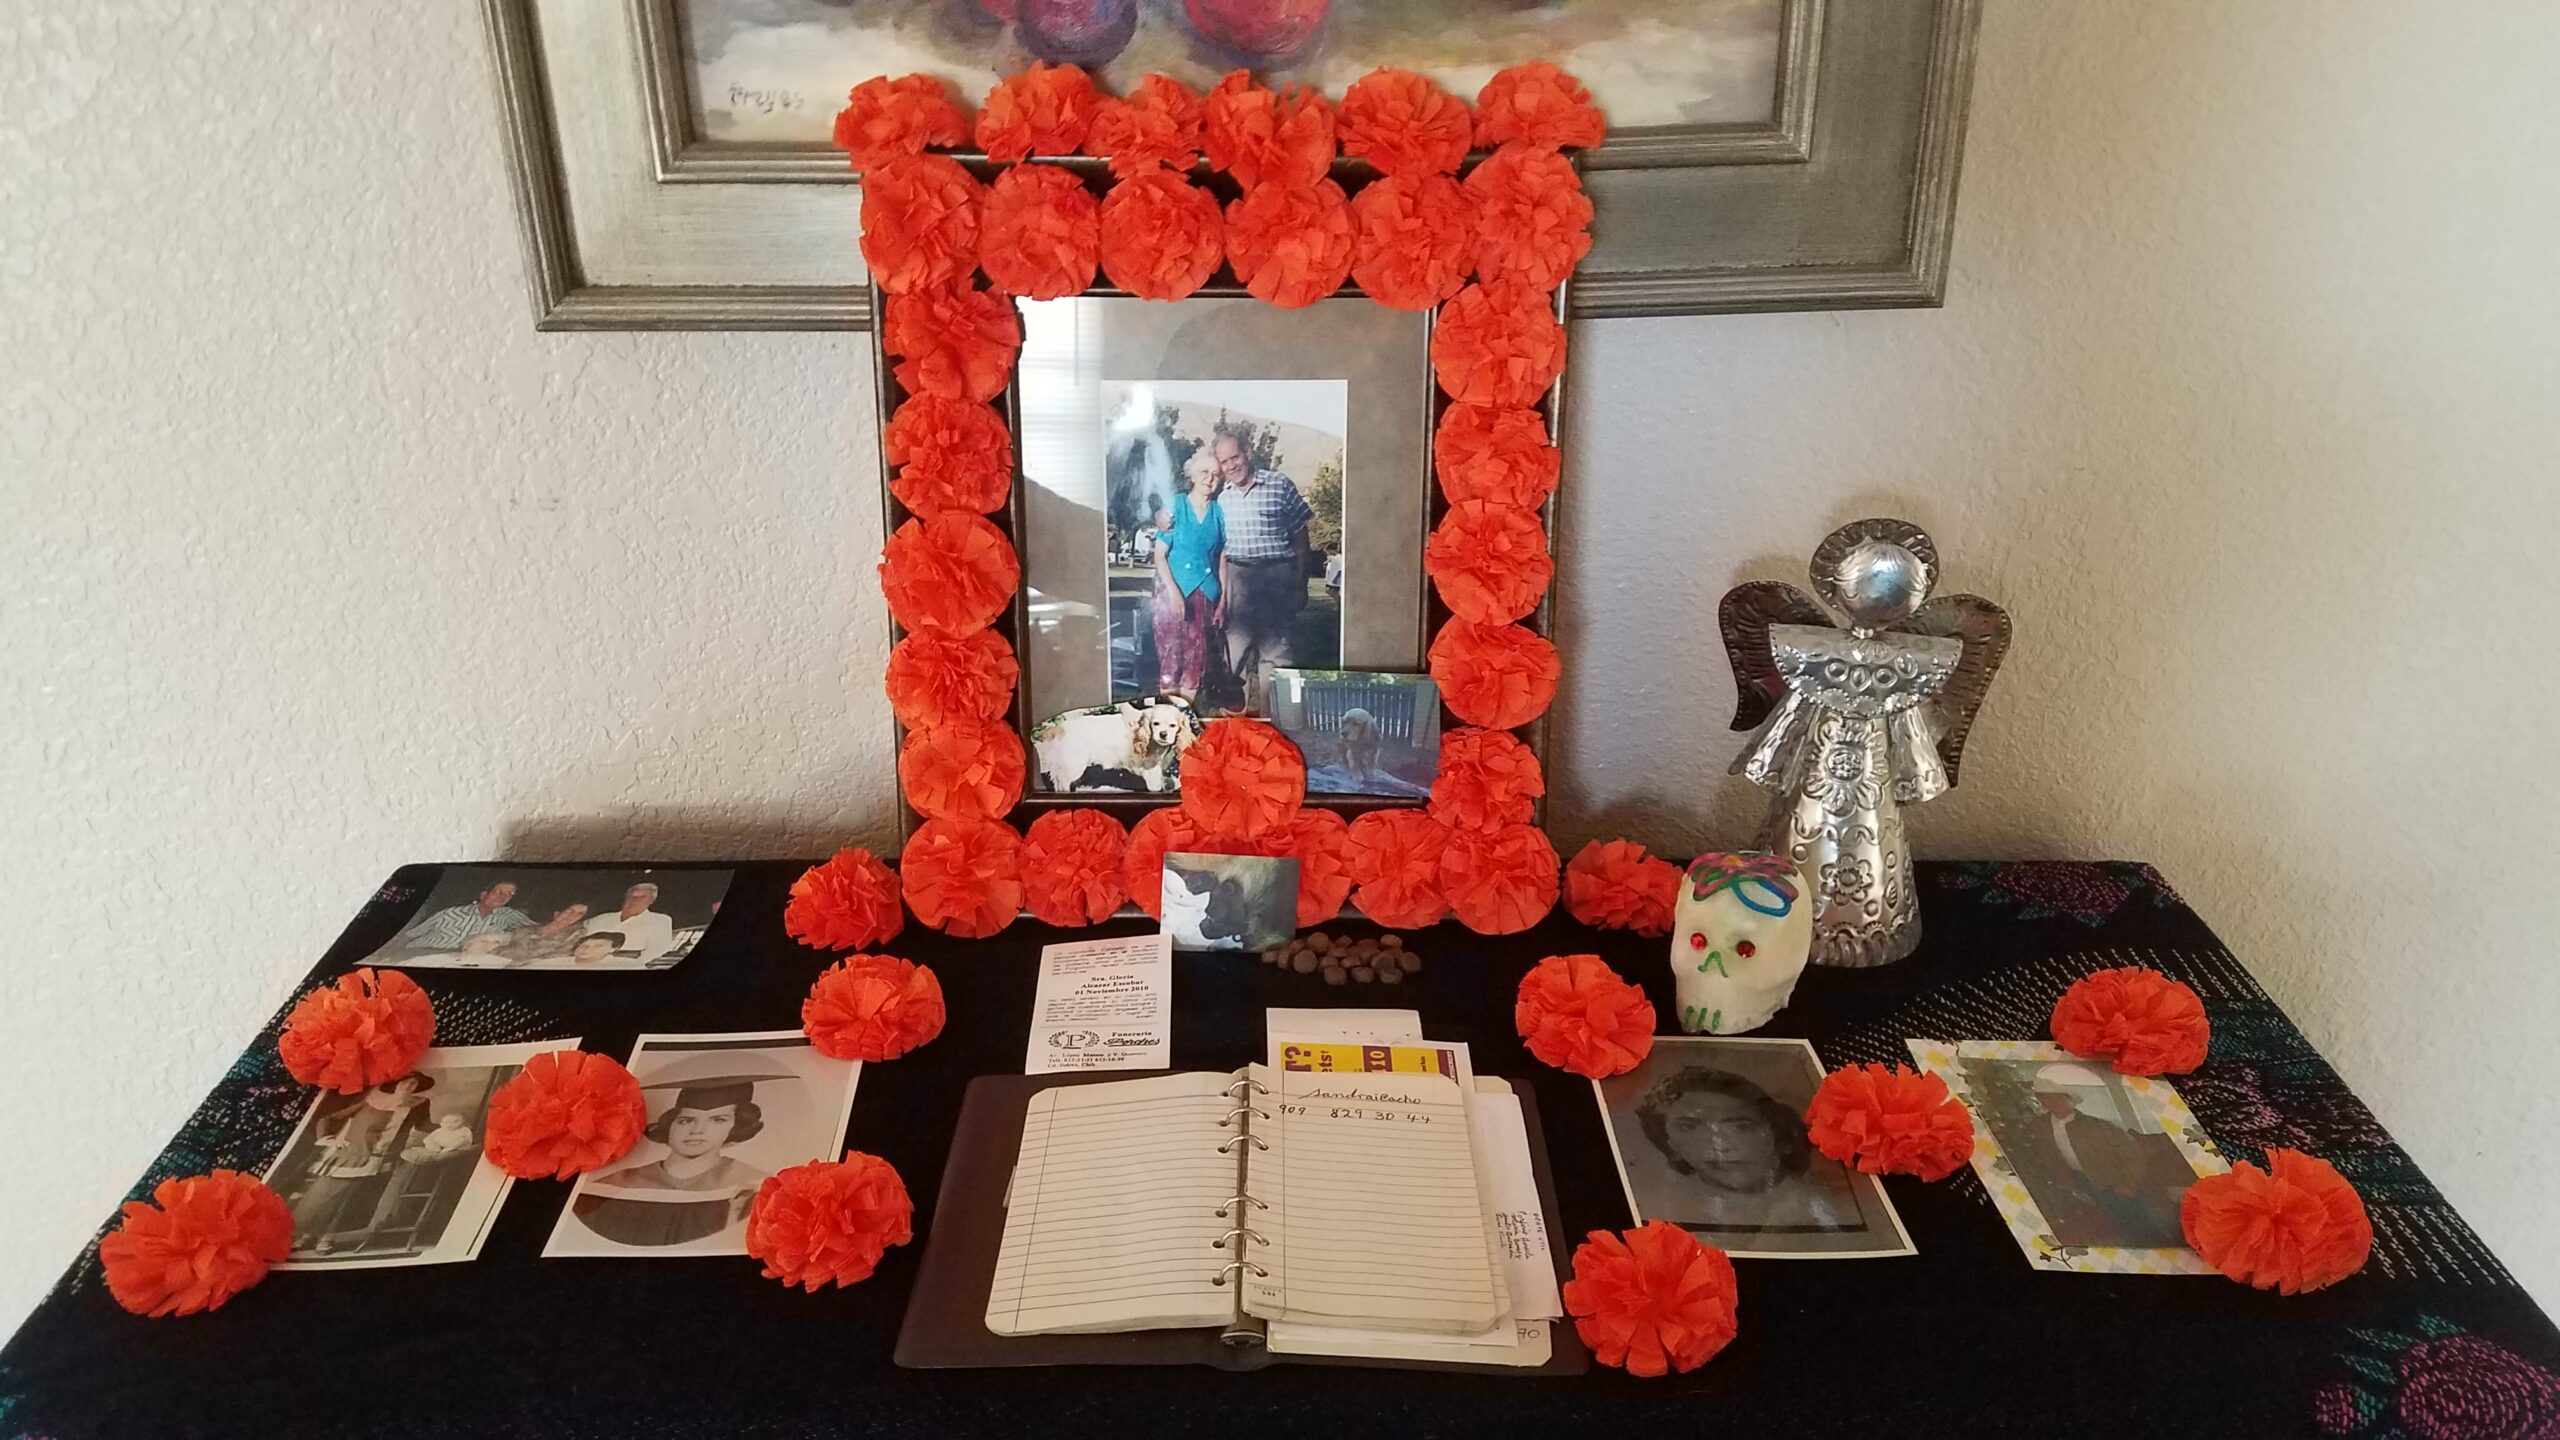 An altar including red flowers, photographs of loved ones, and small keepsakes including a sugar skull and angel figurine.